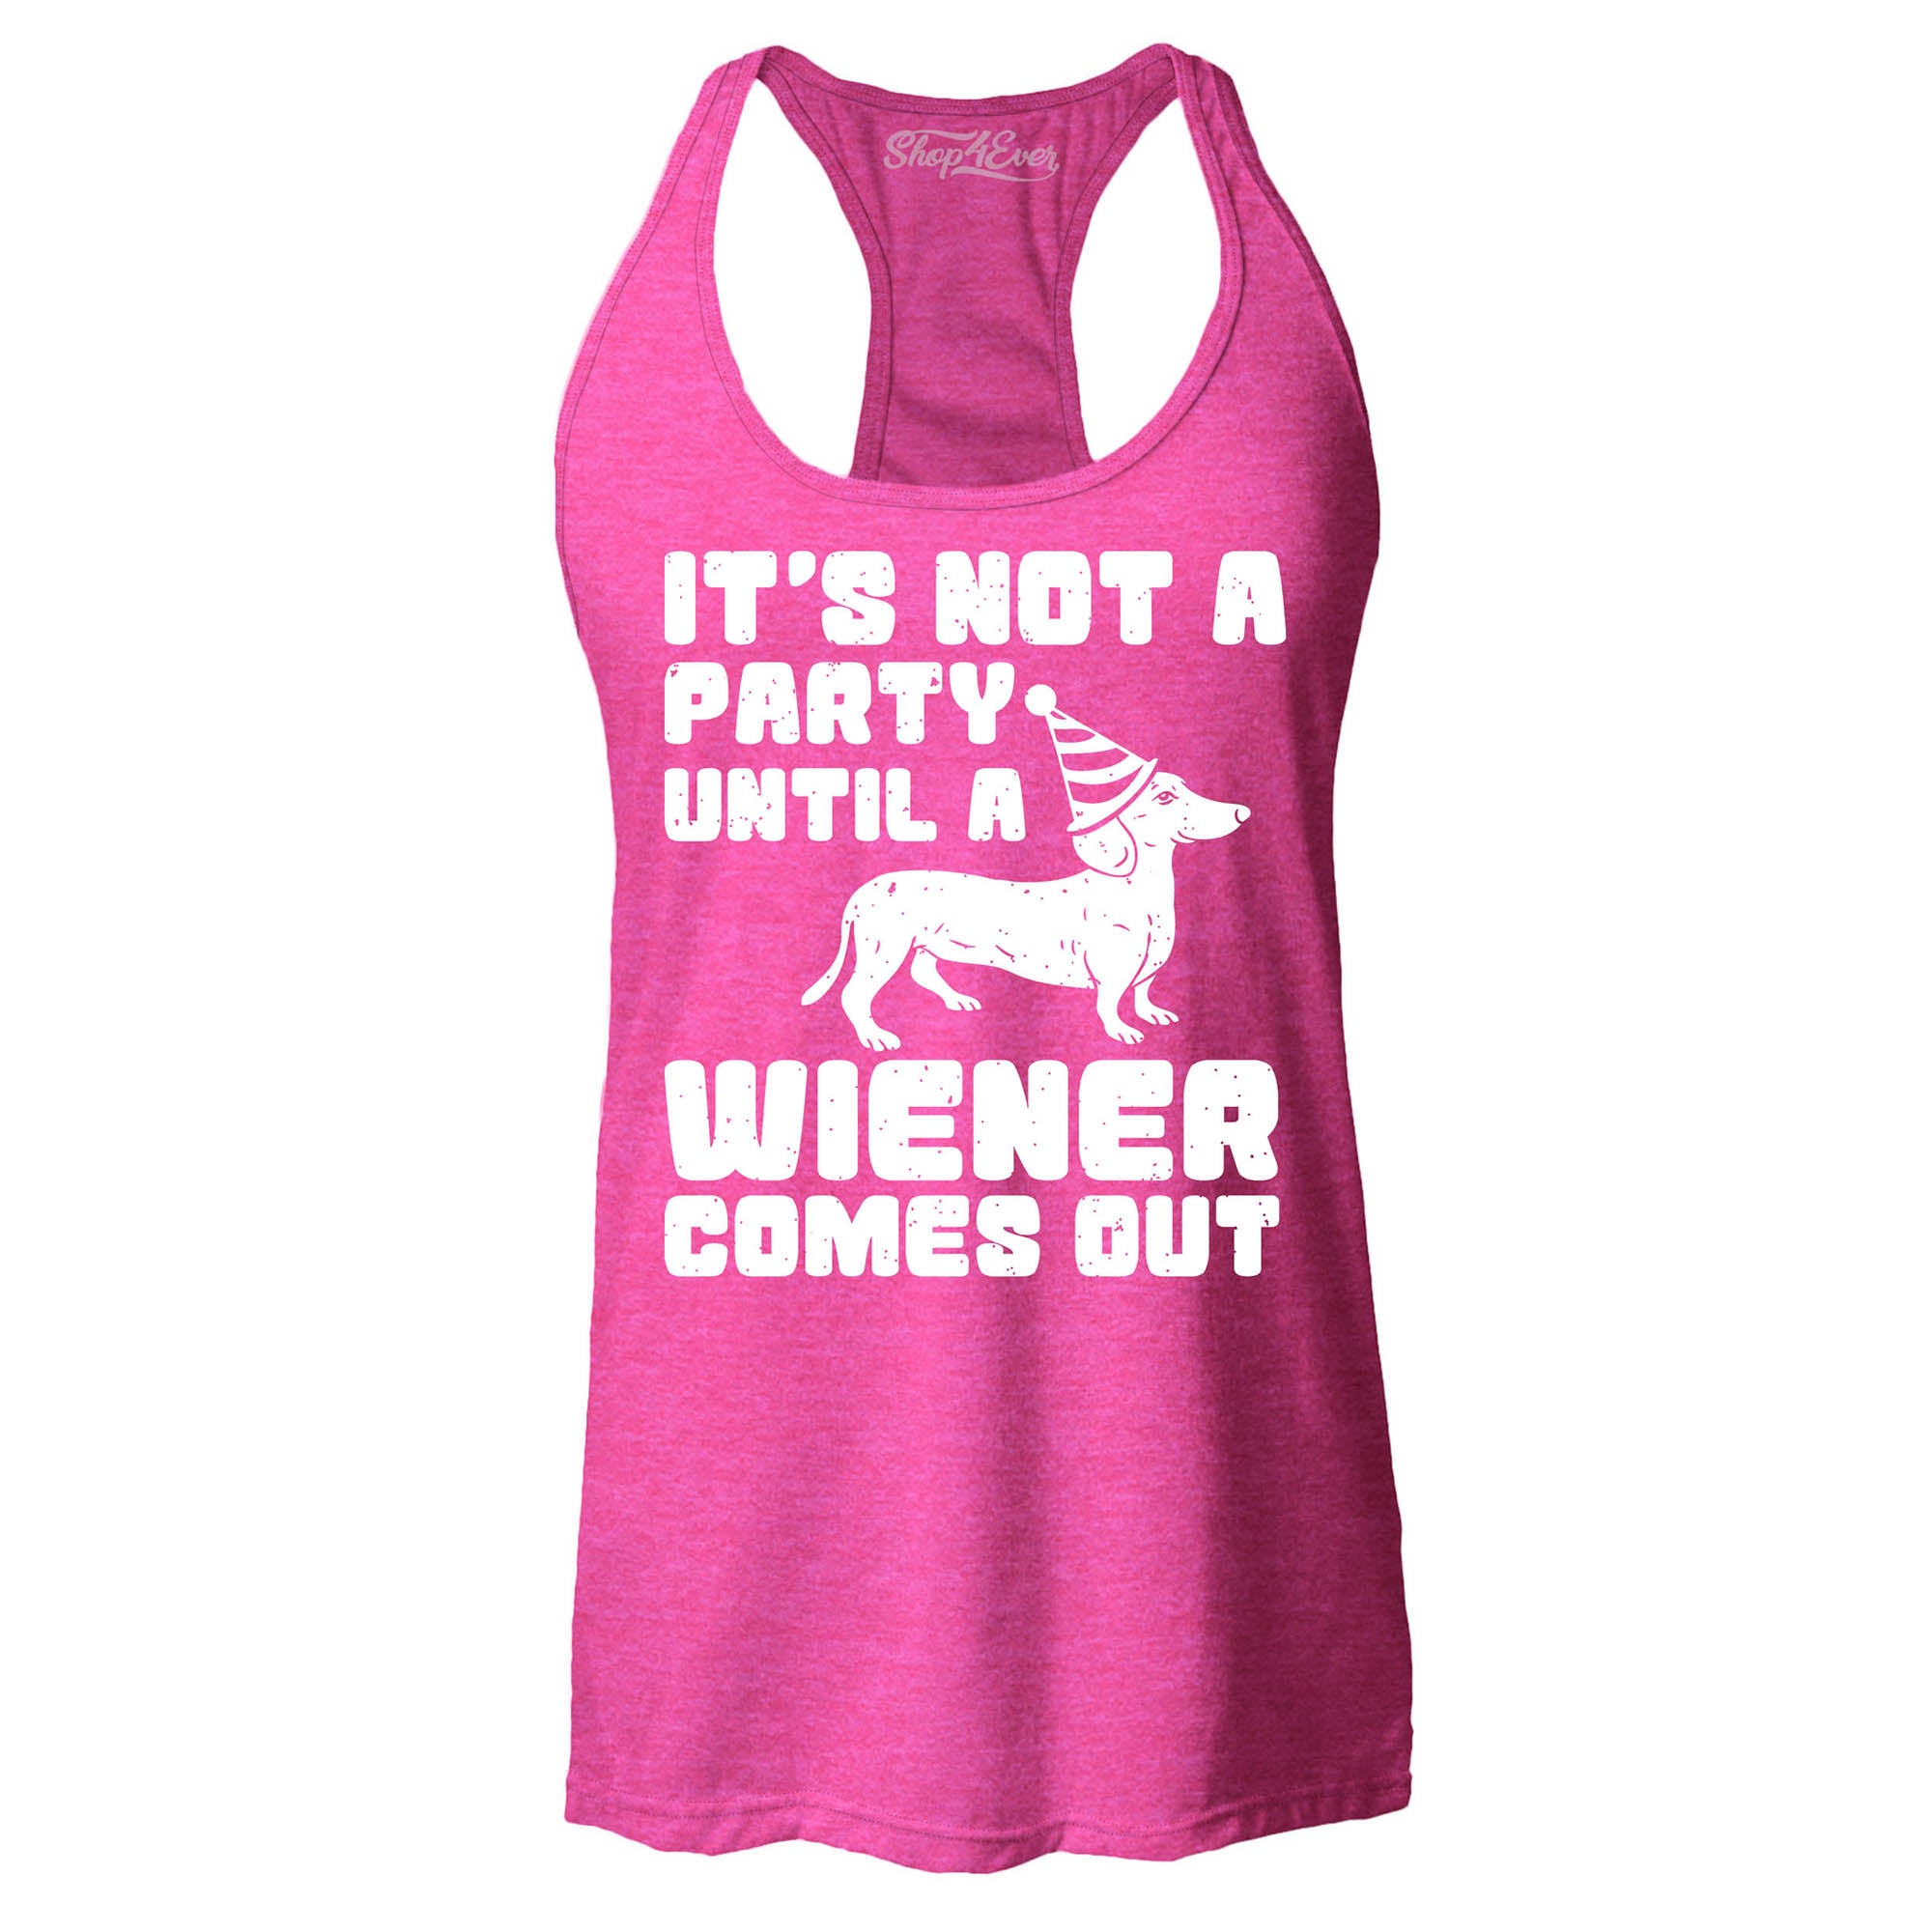 It's Not a Party Until The Wiener Comes Out Funny Dachshund Women's Racerback Tank Top Slim Fit